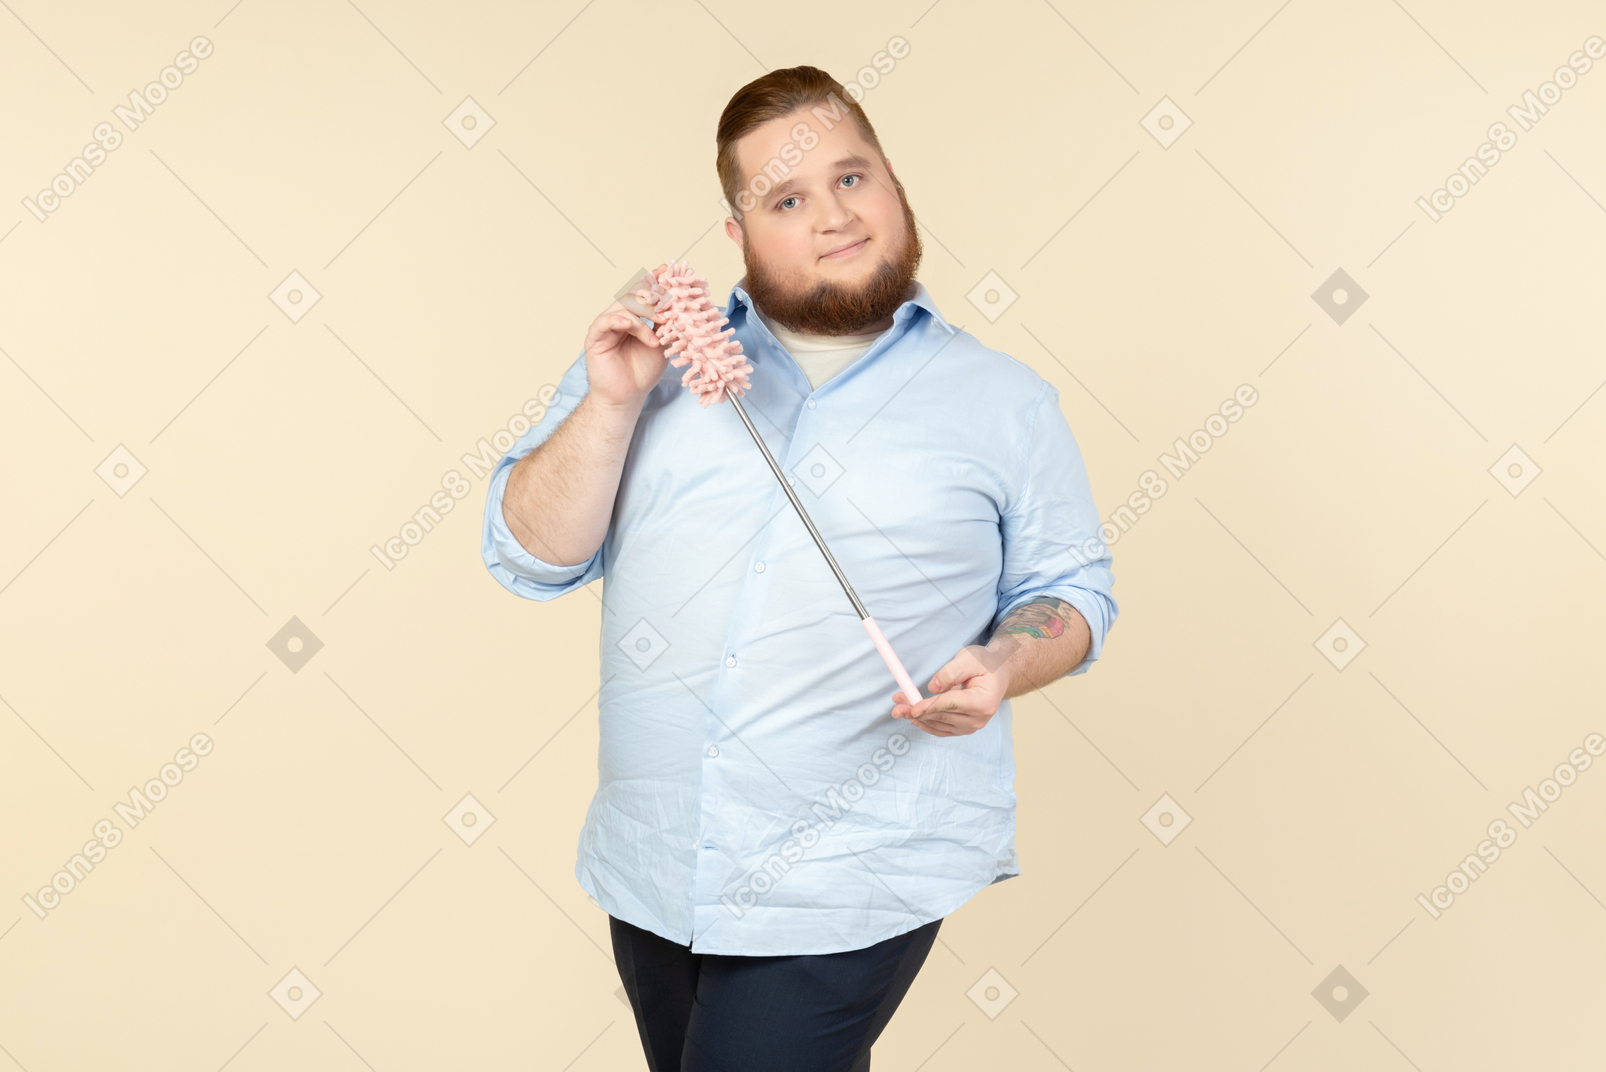 Young overweight househusband showing pipe-cleaner